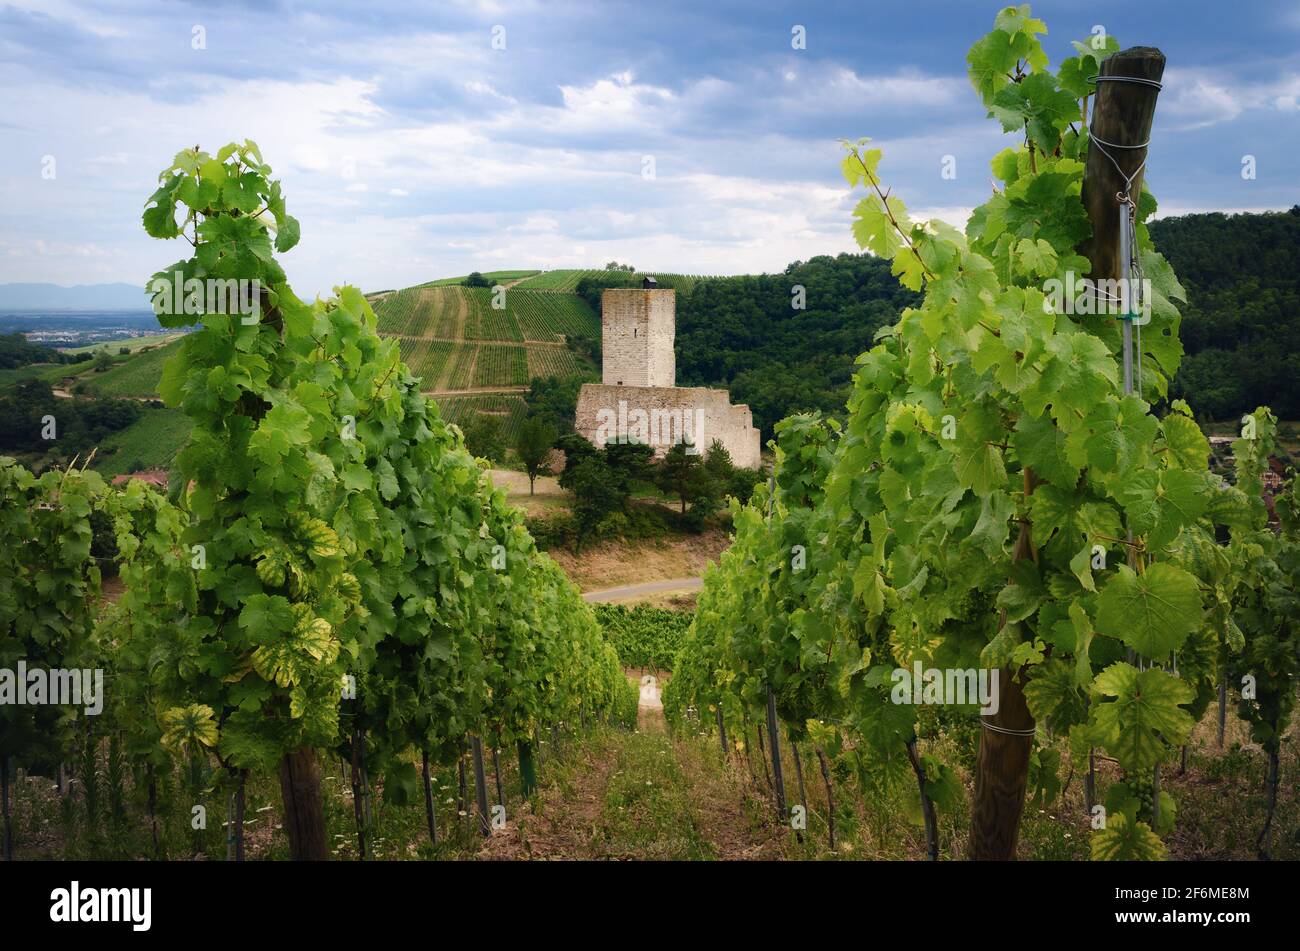 Summer view between the vines of the ruins of Chateau de Wineck, ancient abandoned castle in the vineyard of Katzenthal, famous winemaking village in Stock Photo